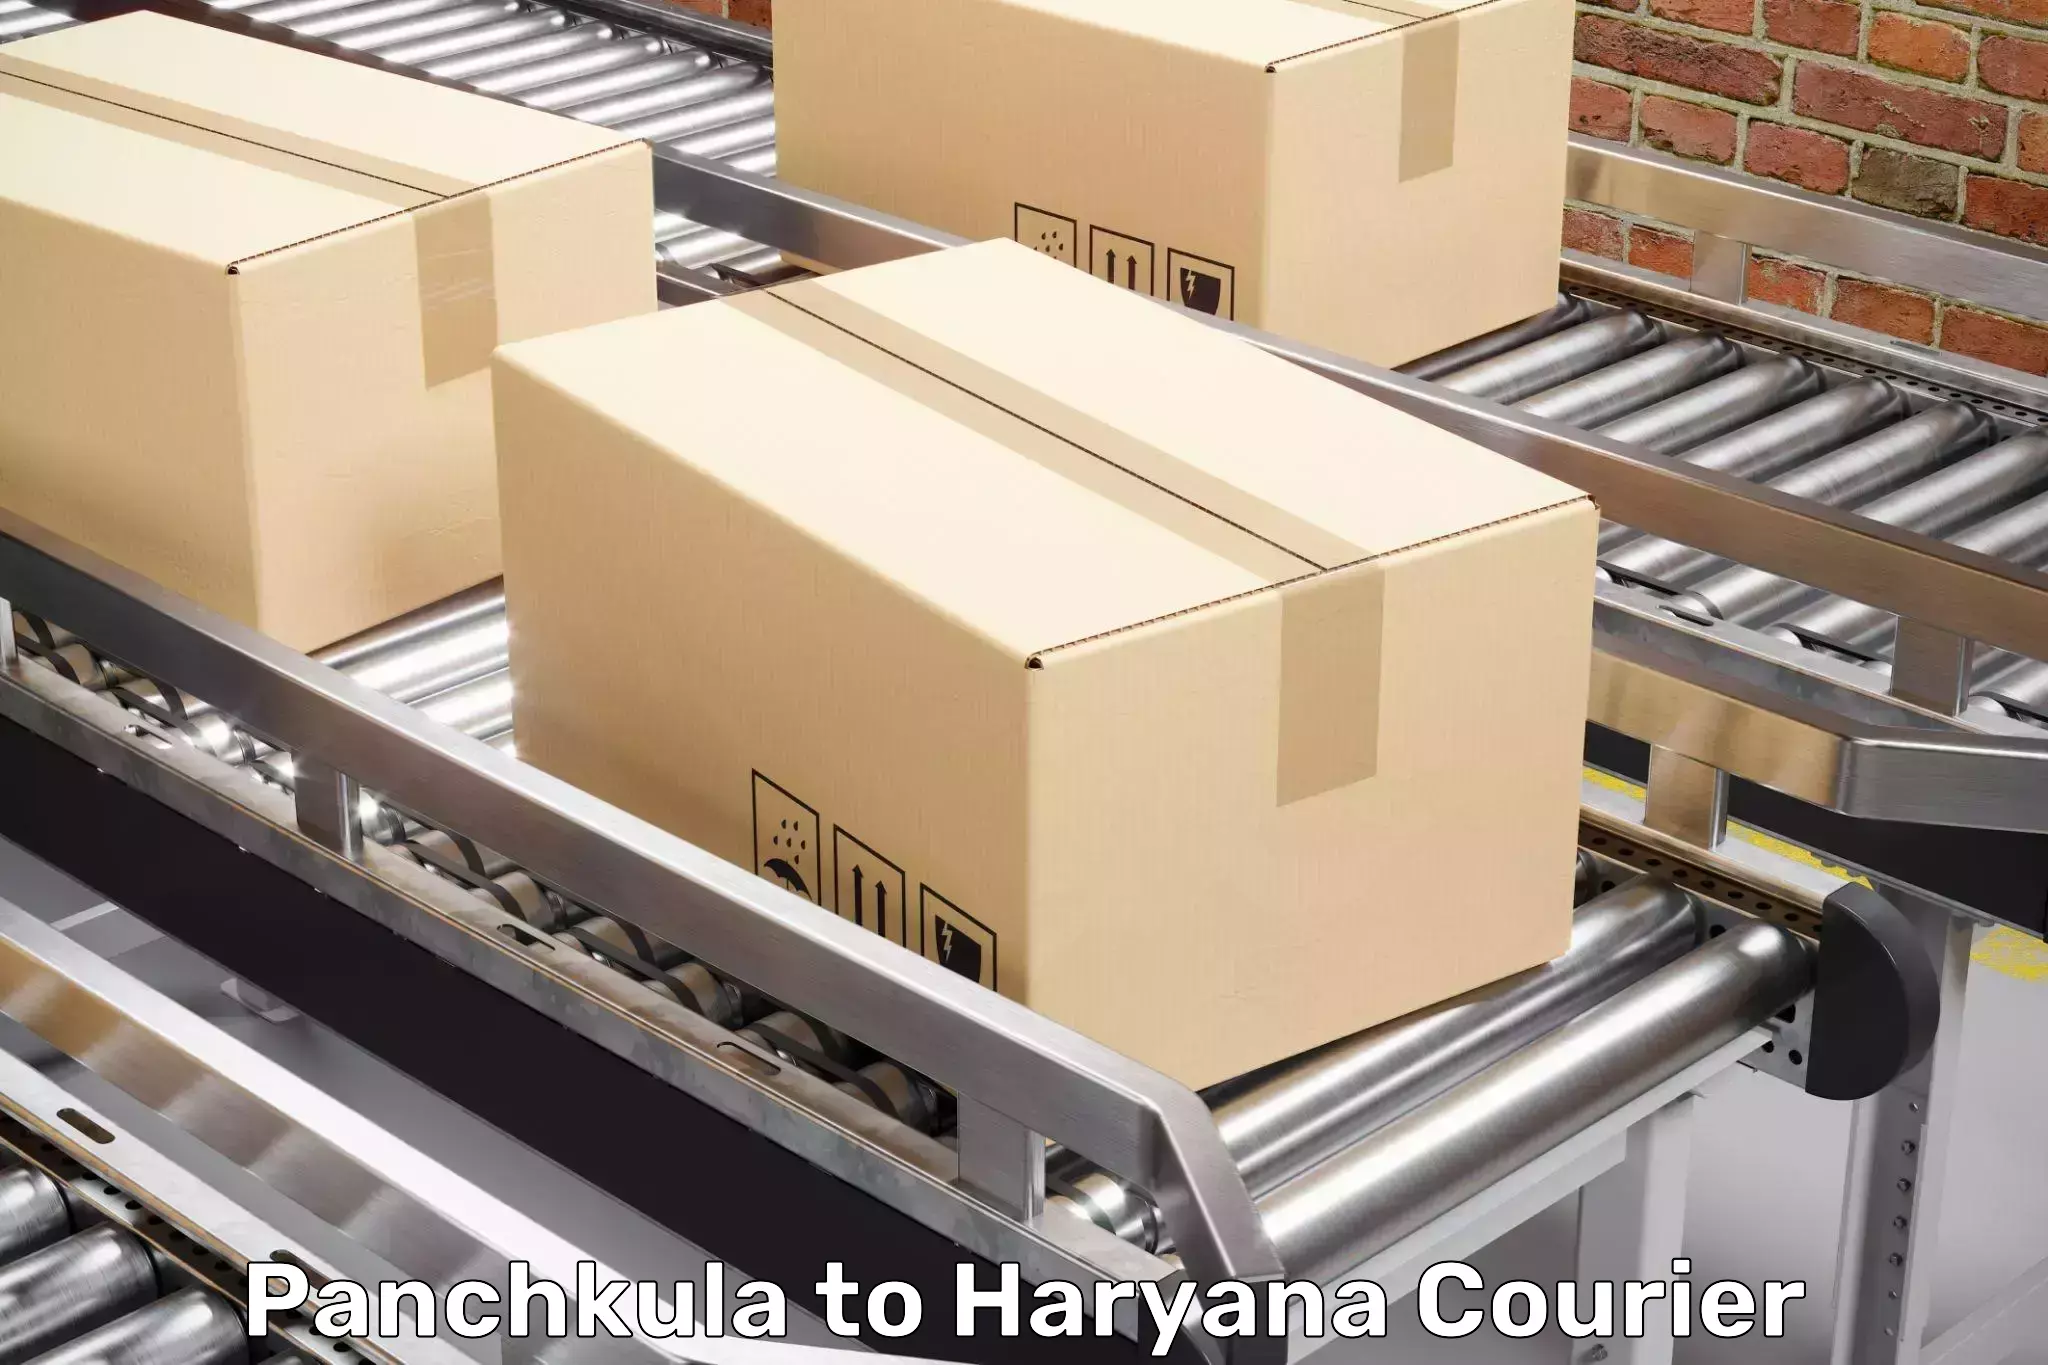 Reliable relocation services Panchkula to Dharuhera